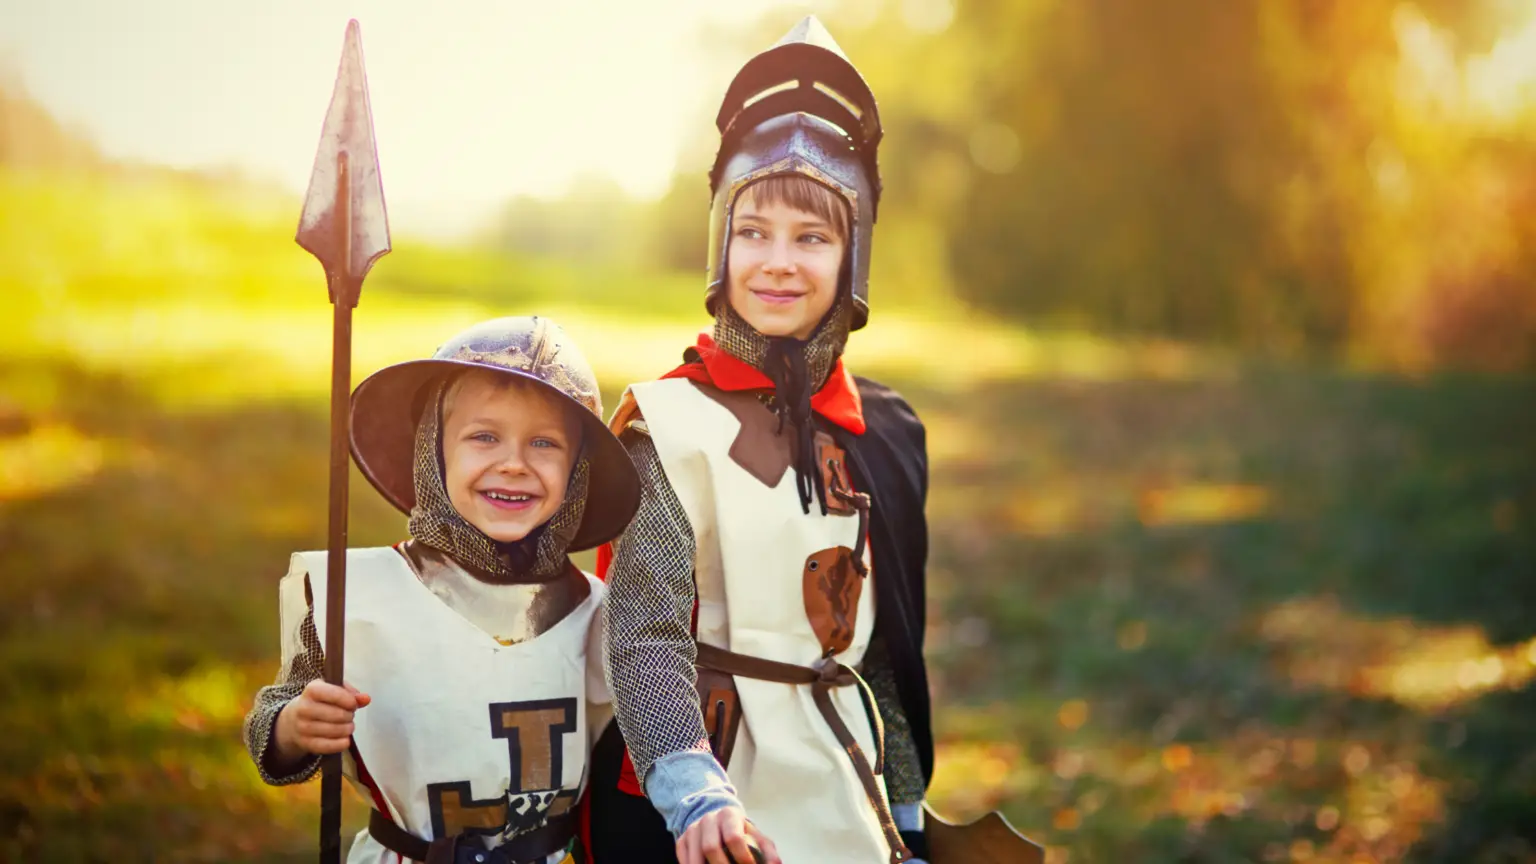 12 CHRISTIAN HALLOWEEN PARTY IDEAS (WHICH DON'T CELEBRATE THE SCARY